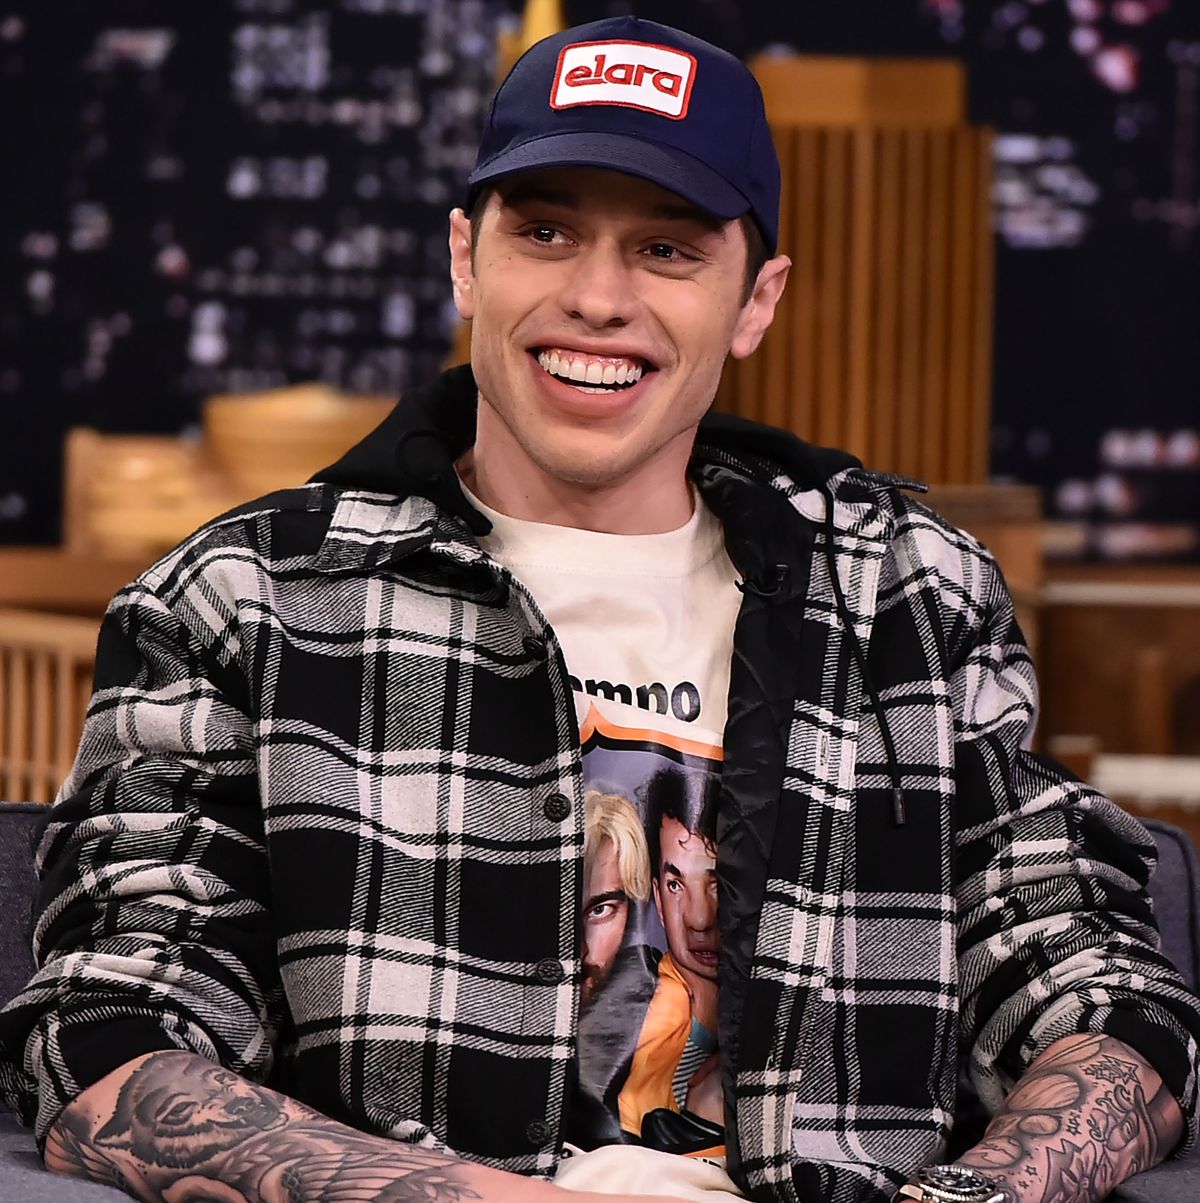 Pete Davidson Opened Up About His Ex Girlfriends in New Interview